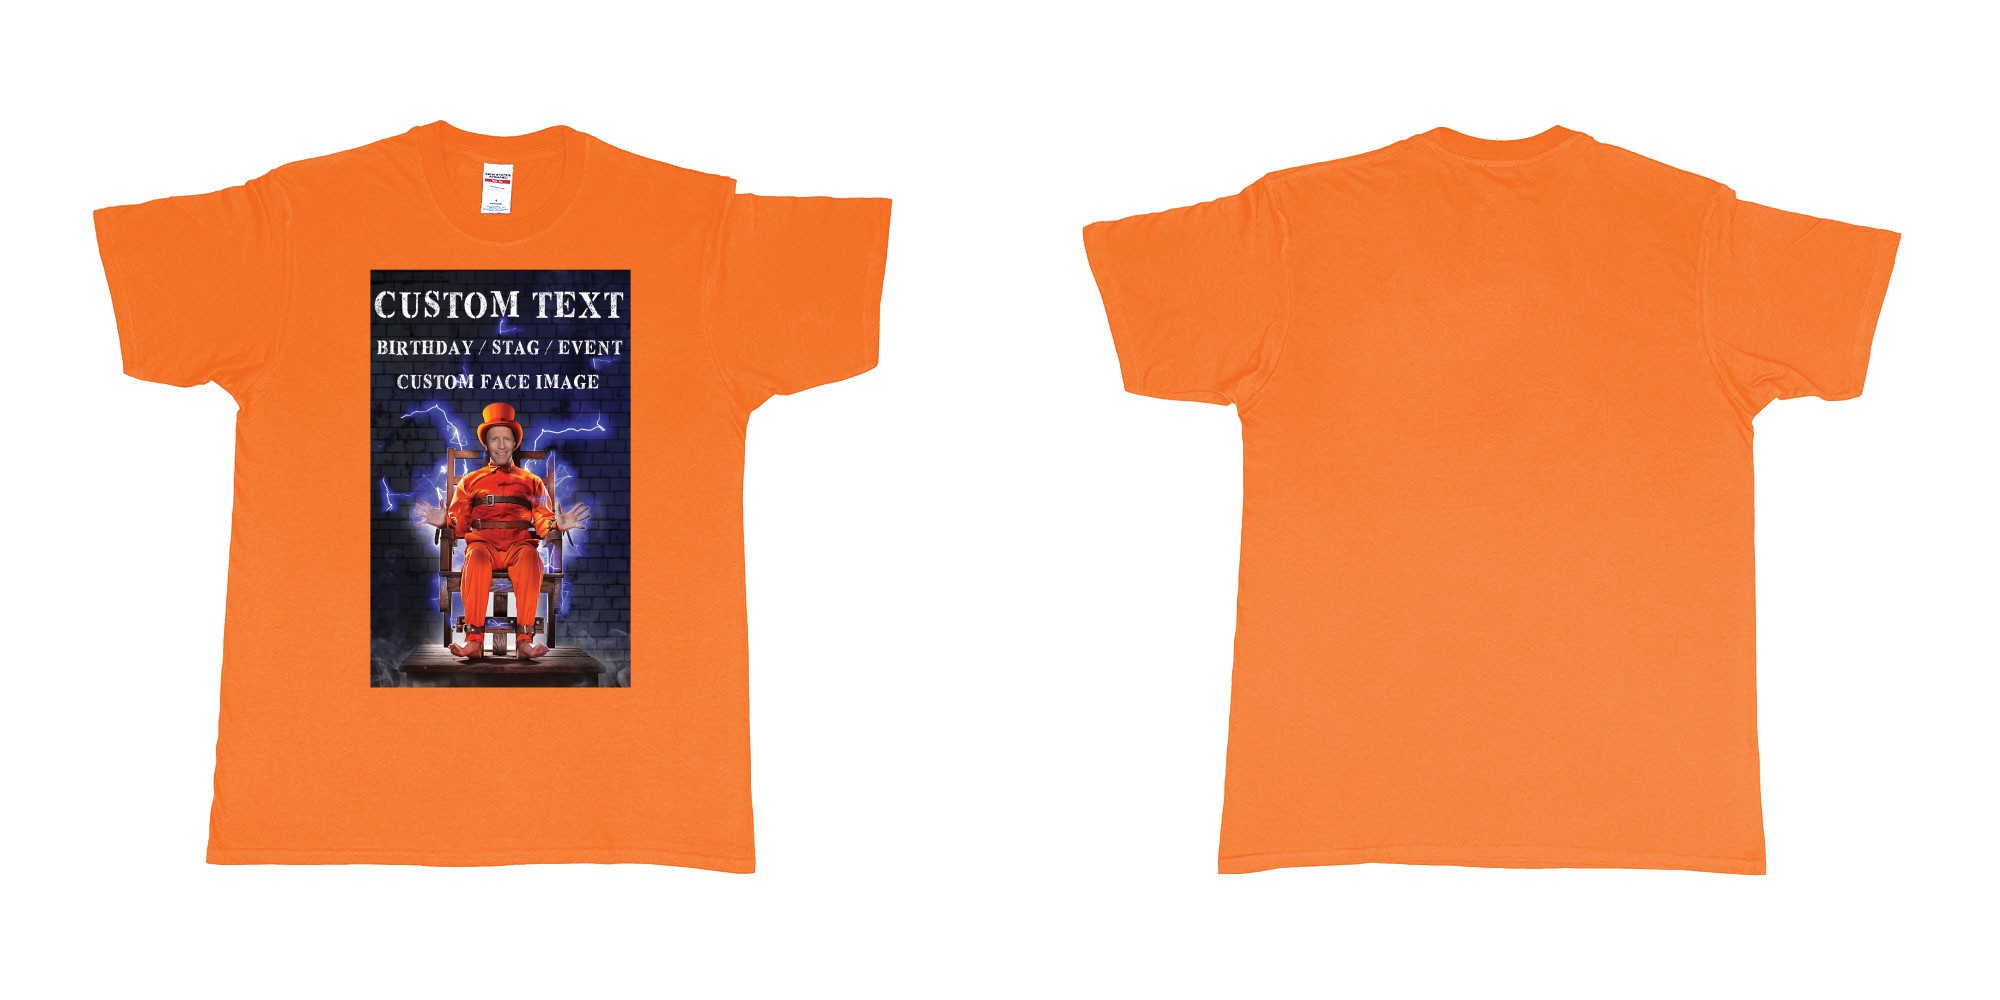 Custom tshirt design stevo guilty as charged custom face image electric chair in fabric color orange choice your own text made in Bali by The Pirate Way